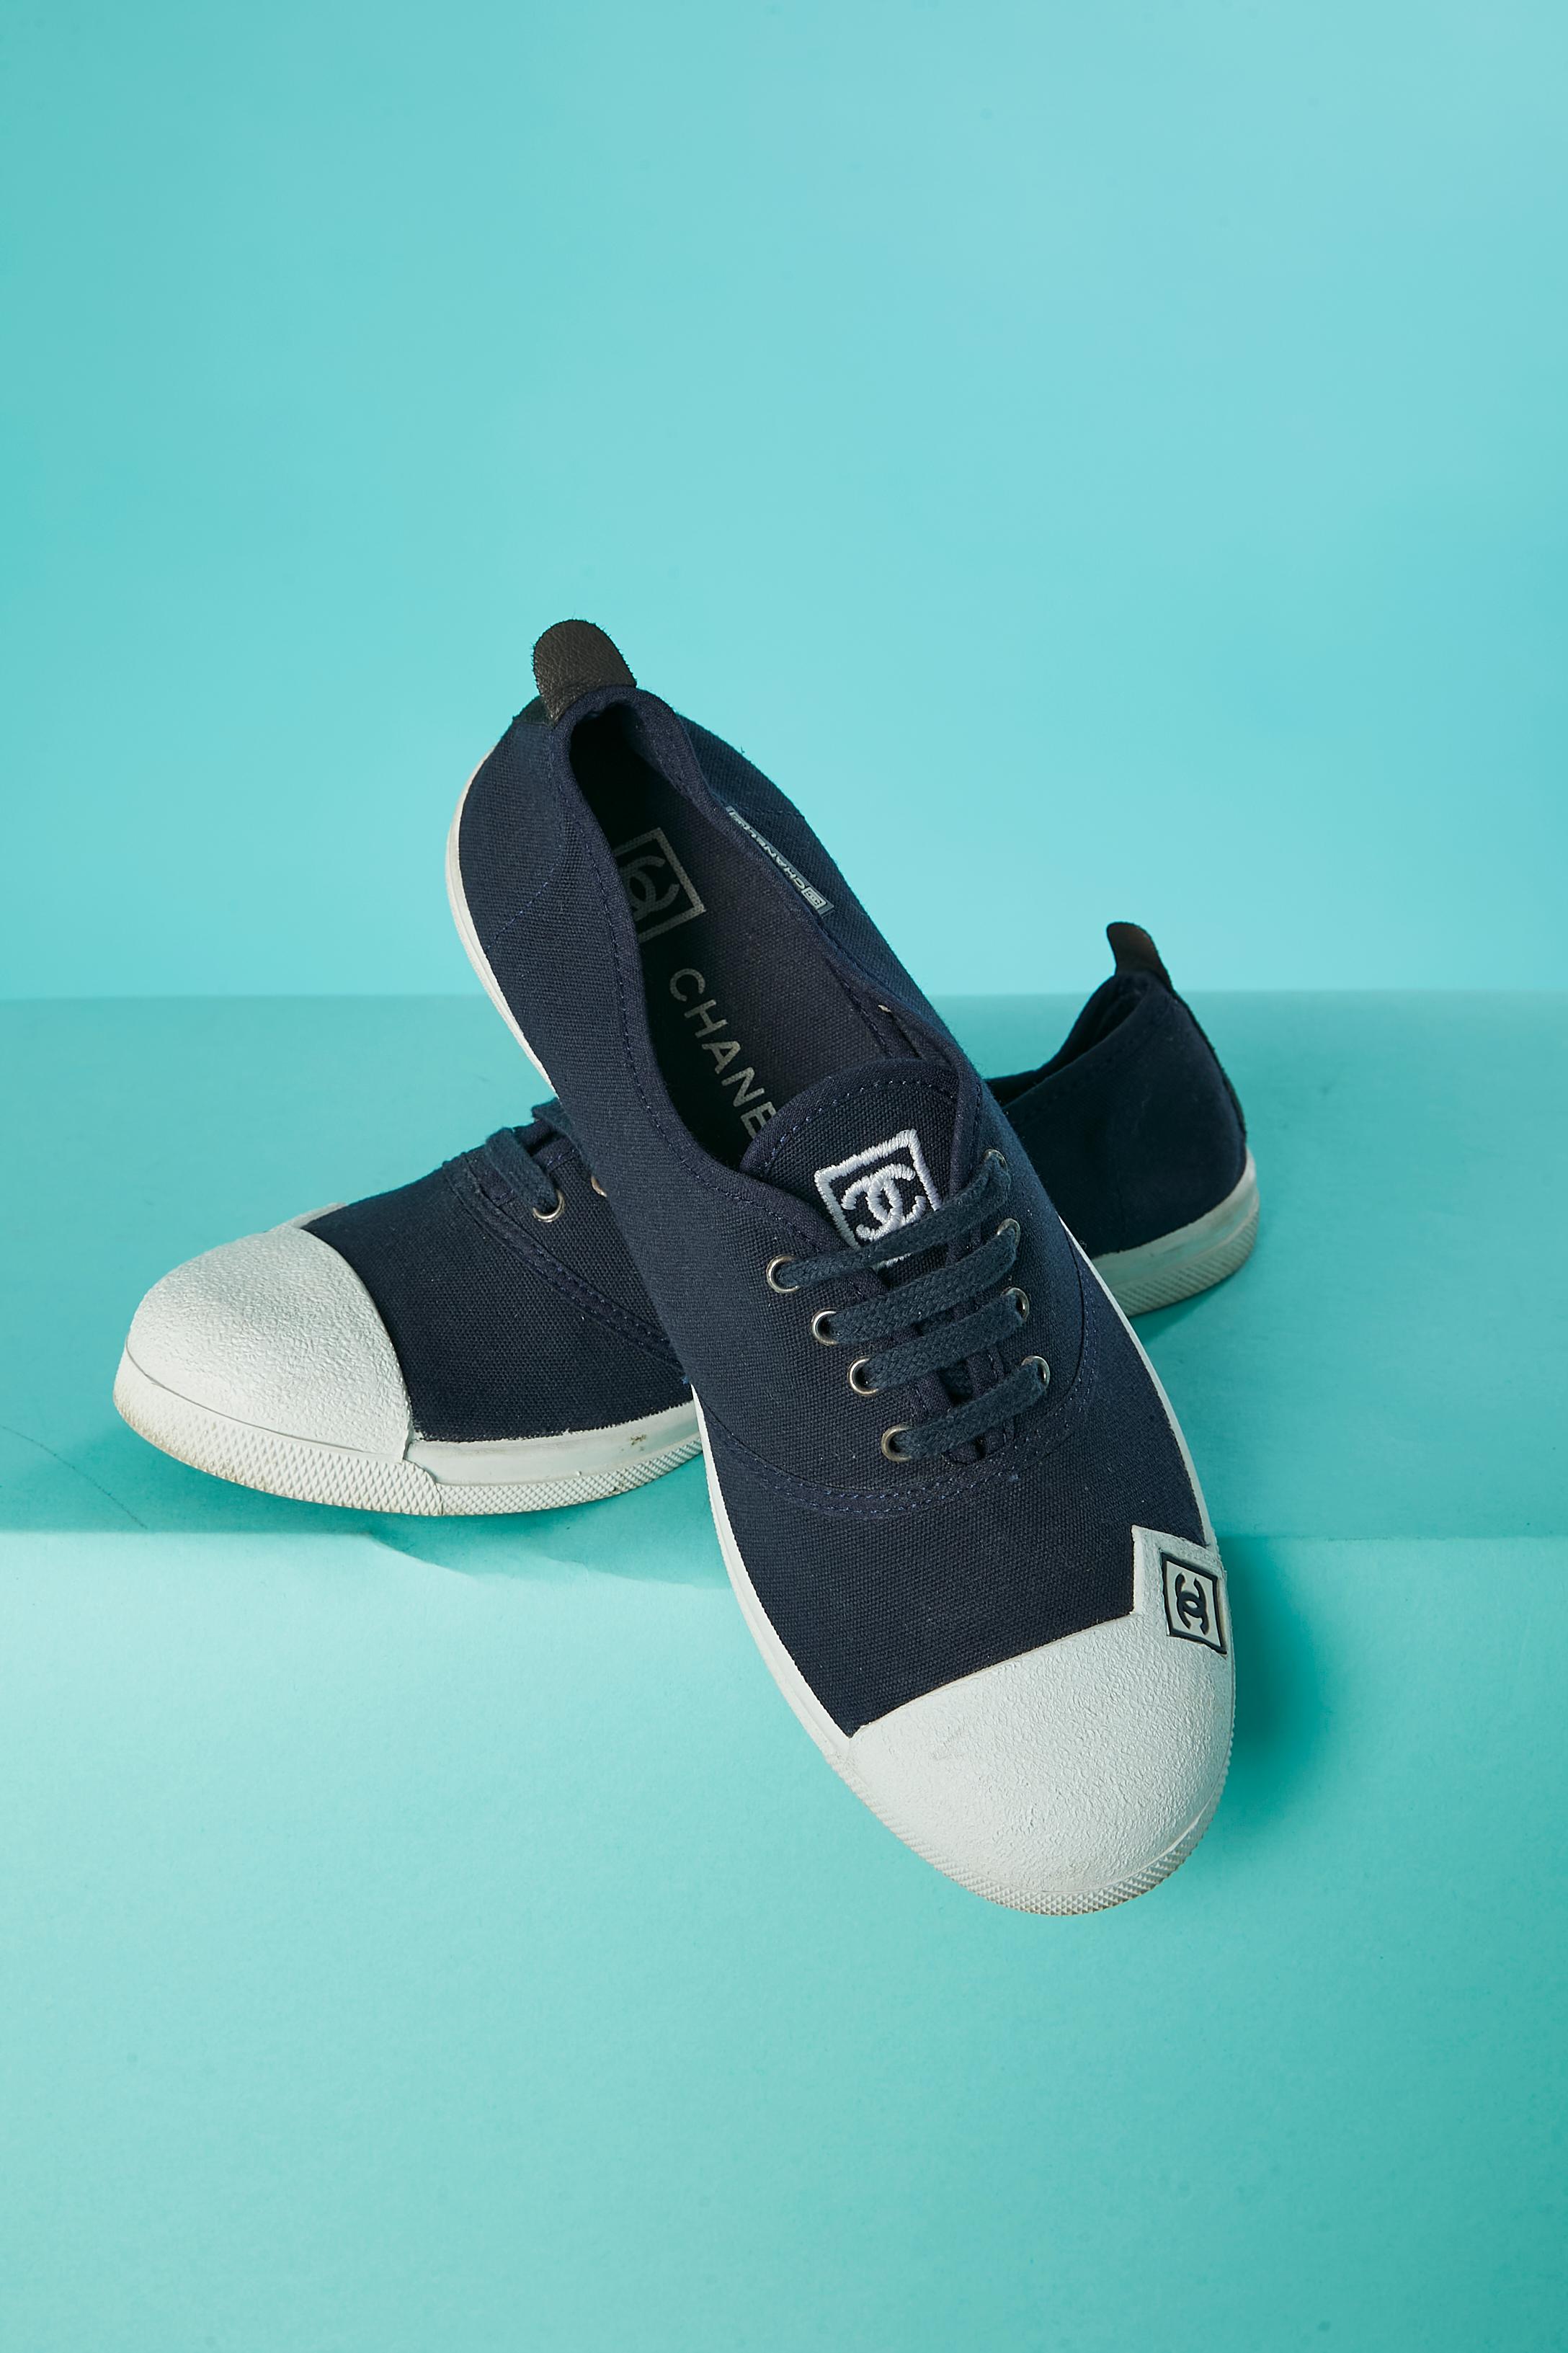 Branded old school style tennis sneakers in navy cotton and white rubber. 
SHOE SIZE : 38